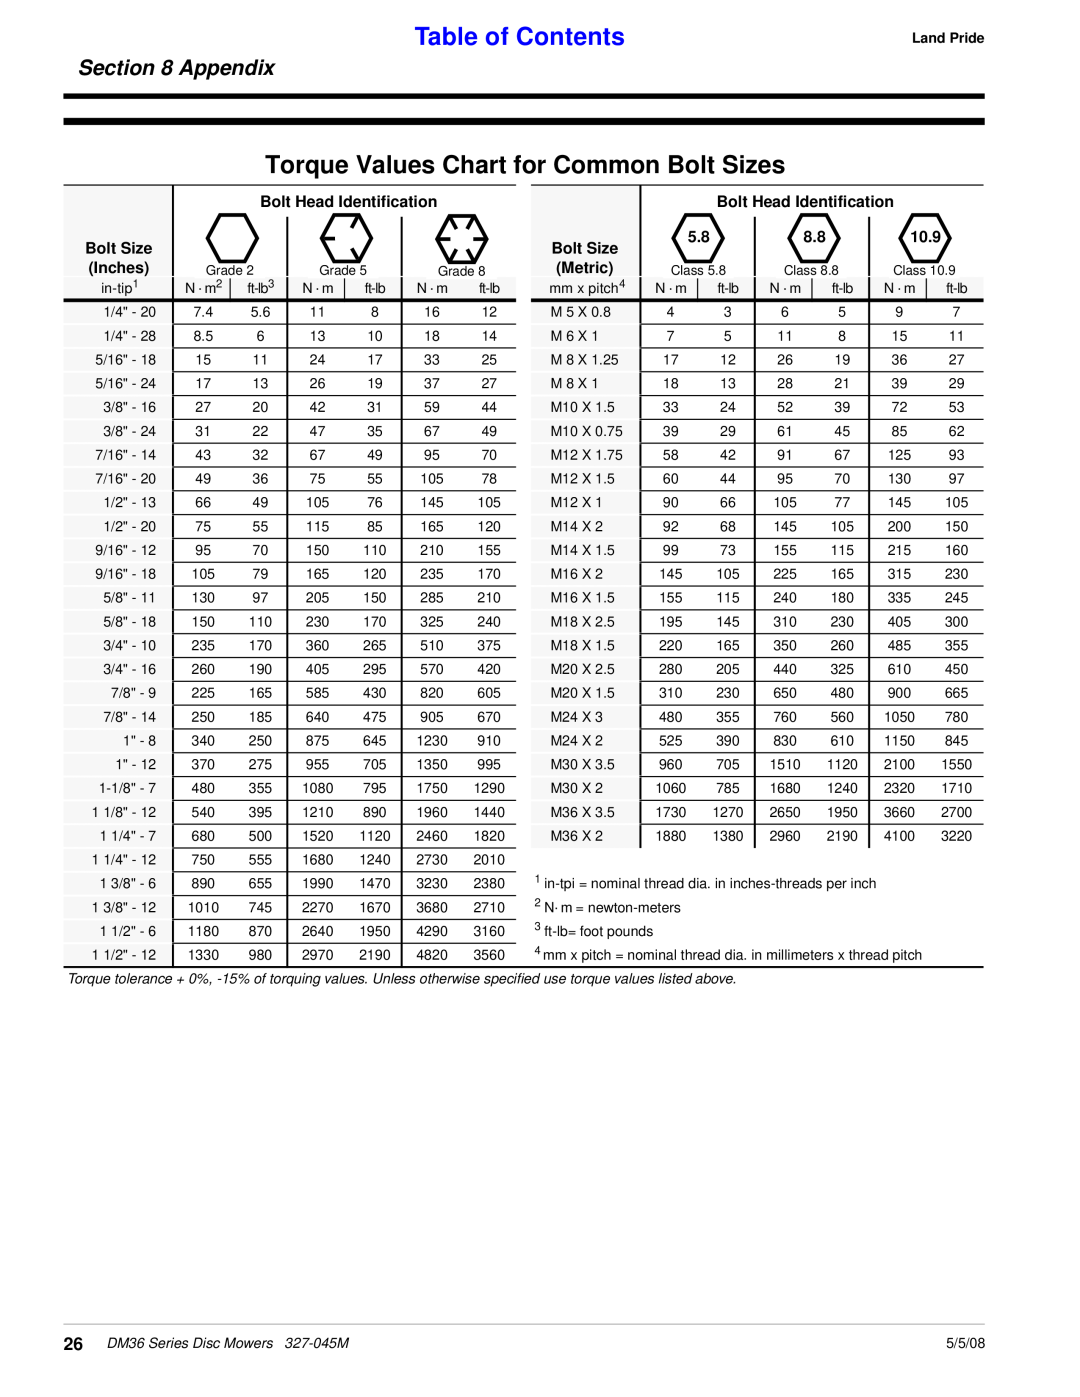 Land Pride DM36 Series manual Torque Values Chart for Common Bolt Sizes, Appendix, Table of Contents, Land Pride, 5/5/08 